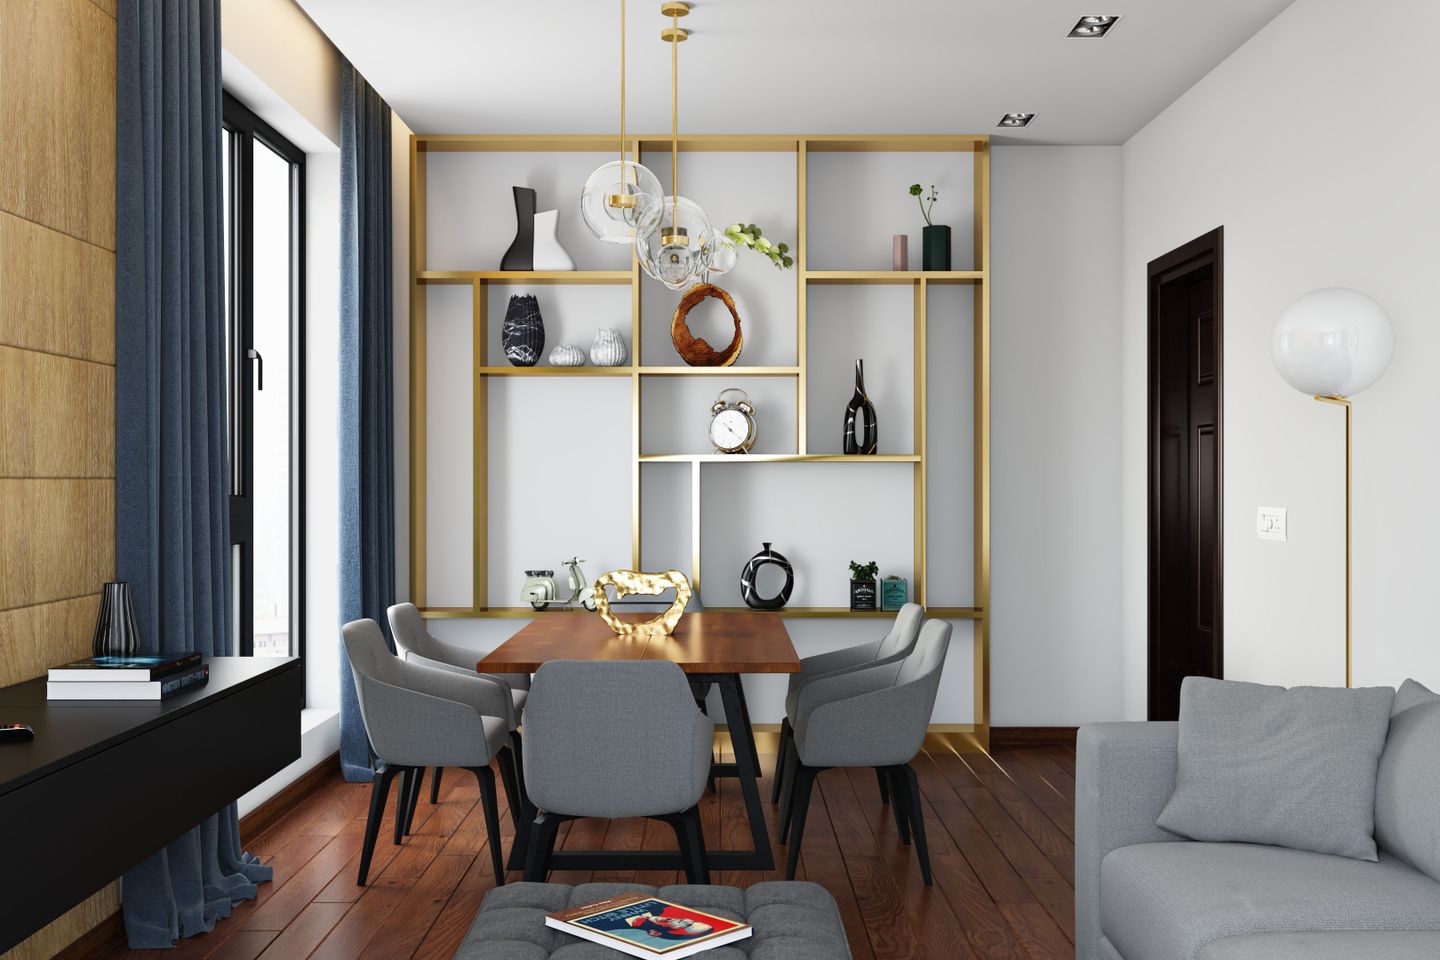 Compact and Convenient Dining Room Ideas - Livspace